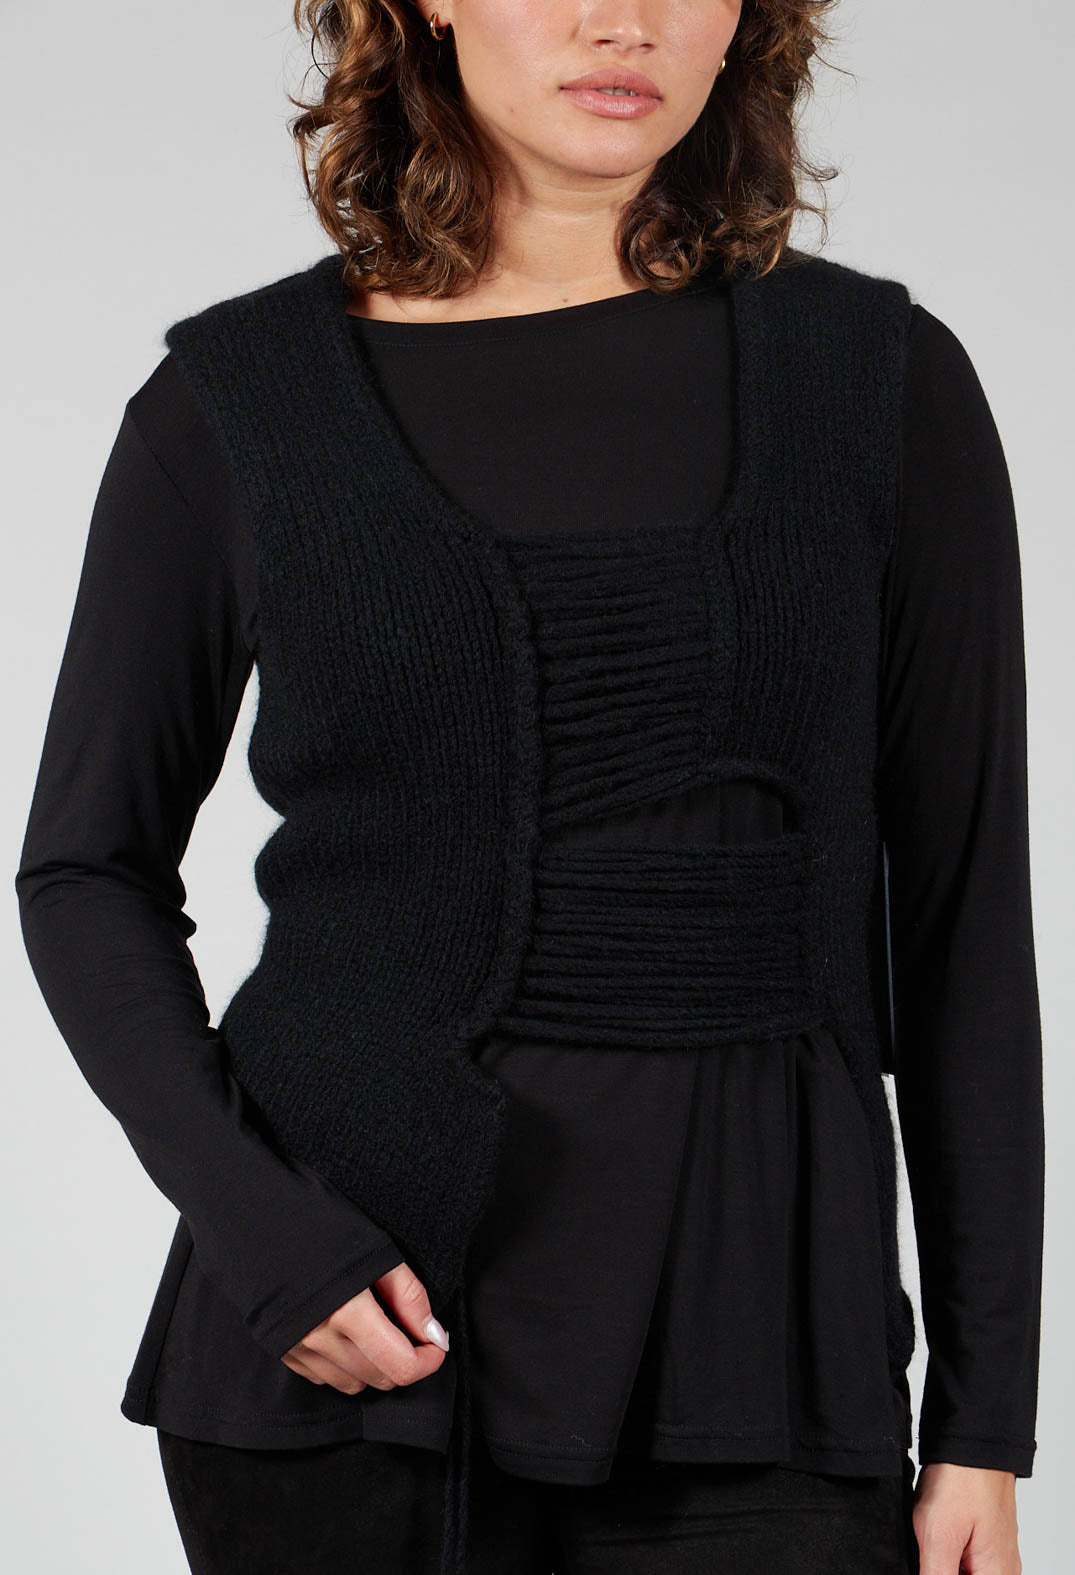 Knitted Vest with Ladder Feature in Black